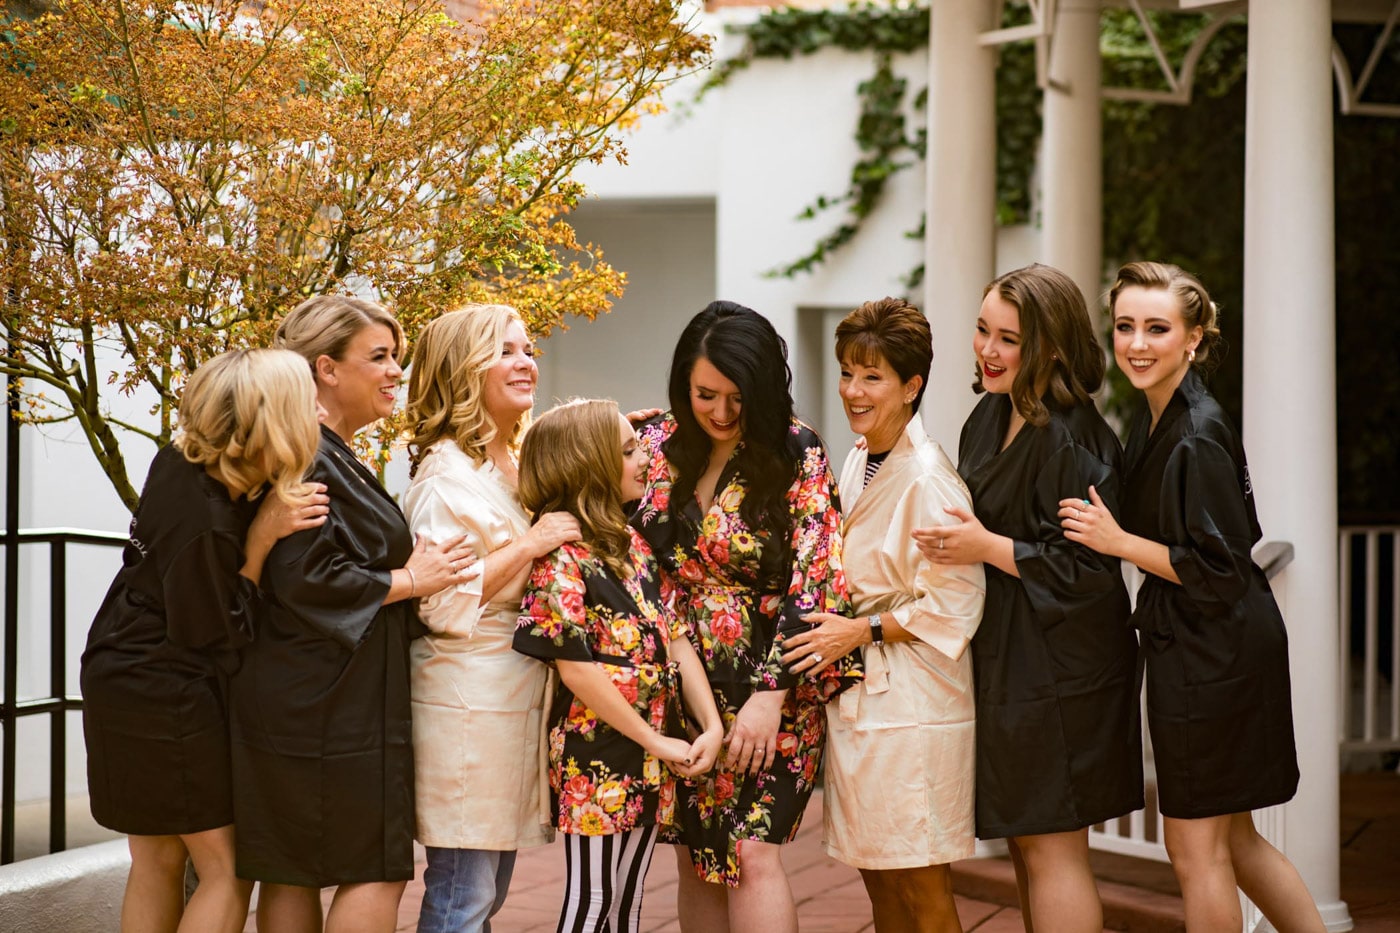 Bride, flower girl, matriarchs, and bridesmaids smiling together in robes